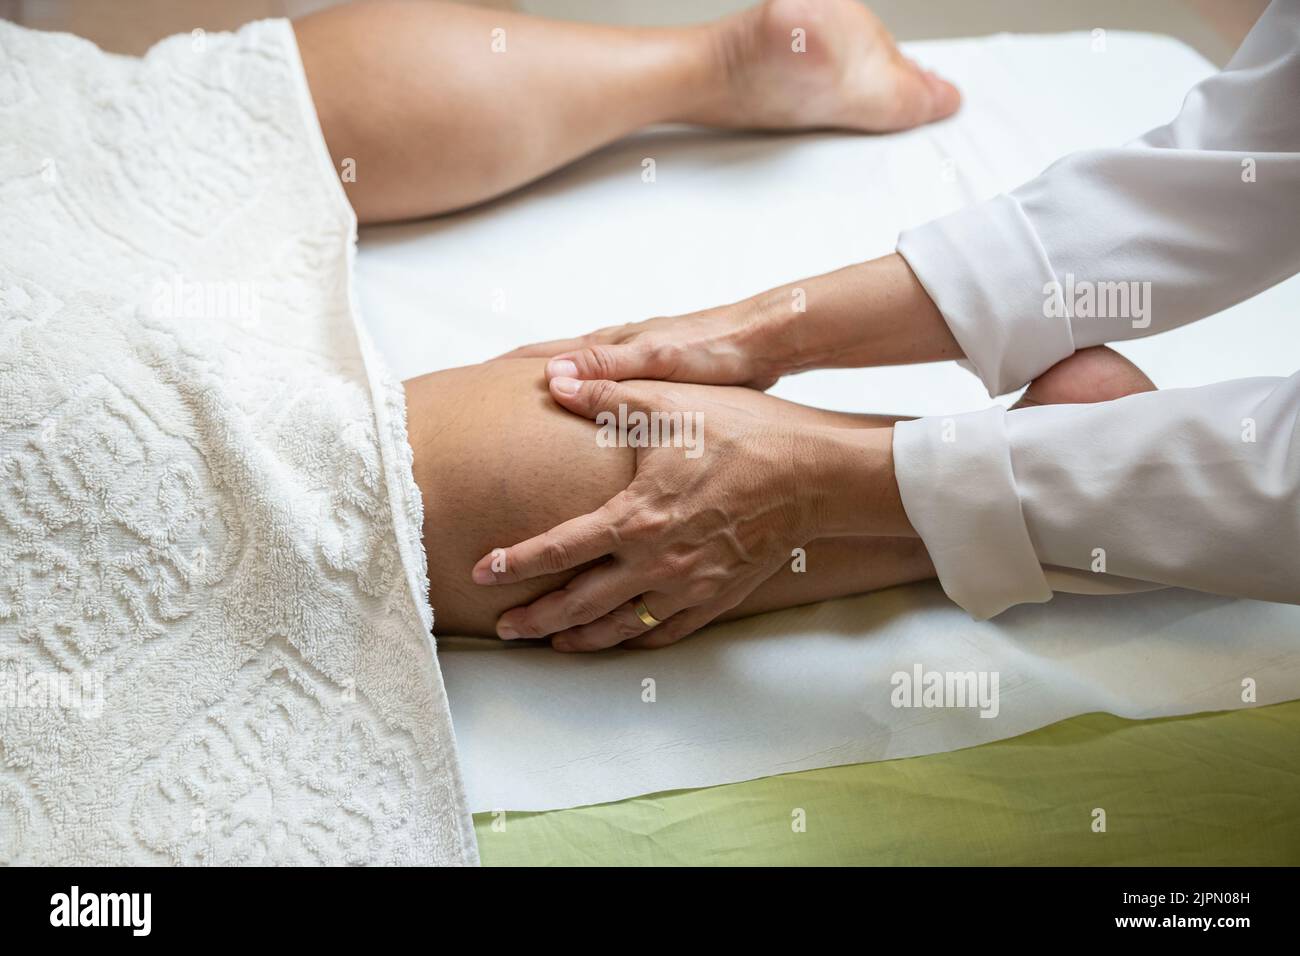 Goiânia, Goias, Brazil – July 18, 2022: A therapist dressed in white giving a leg massage to a patient lying on a stretcher. Stock Photo